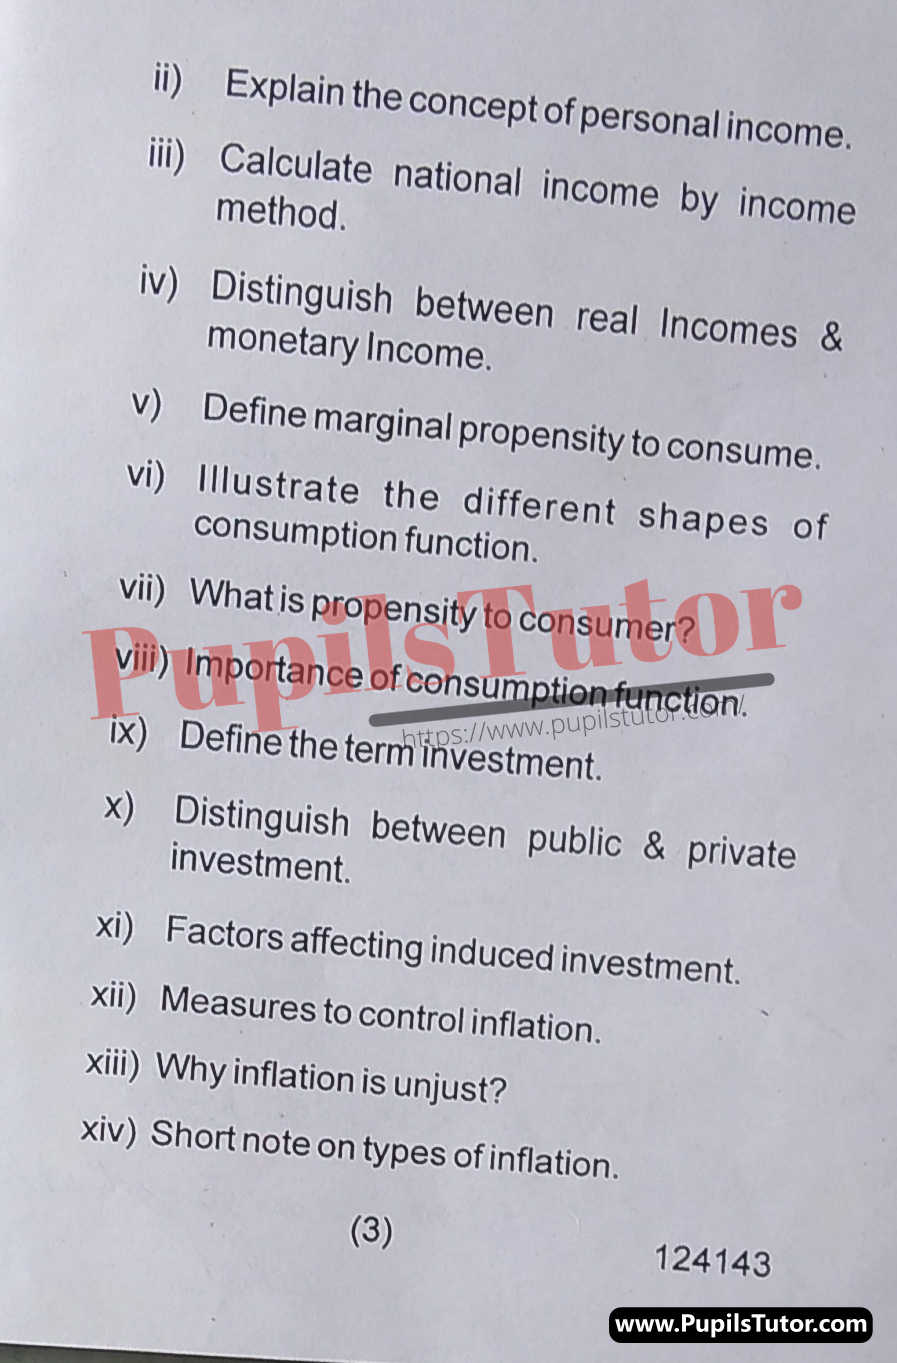 Free Download PDF Of Haryana State Board of Technical Education (HSBTE) FAA (Finance Accounts And Auditing) Fourth Semester Latest Question Paper For Managerial Economics Subject (Page 3) - https://www.pupilstutor.com